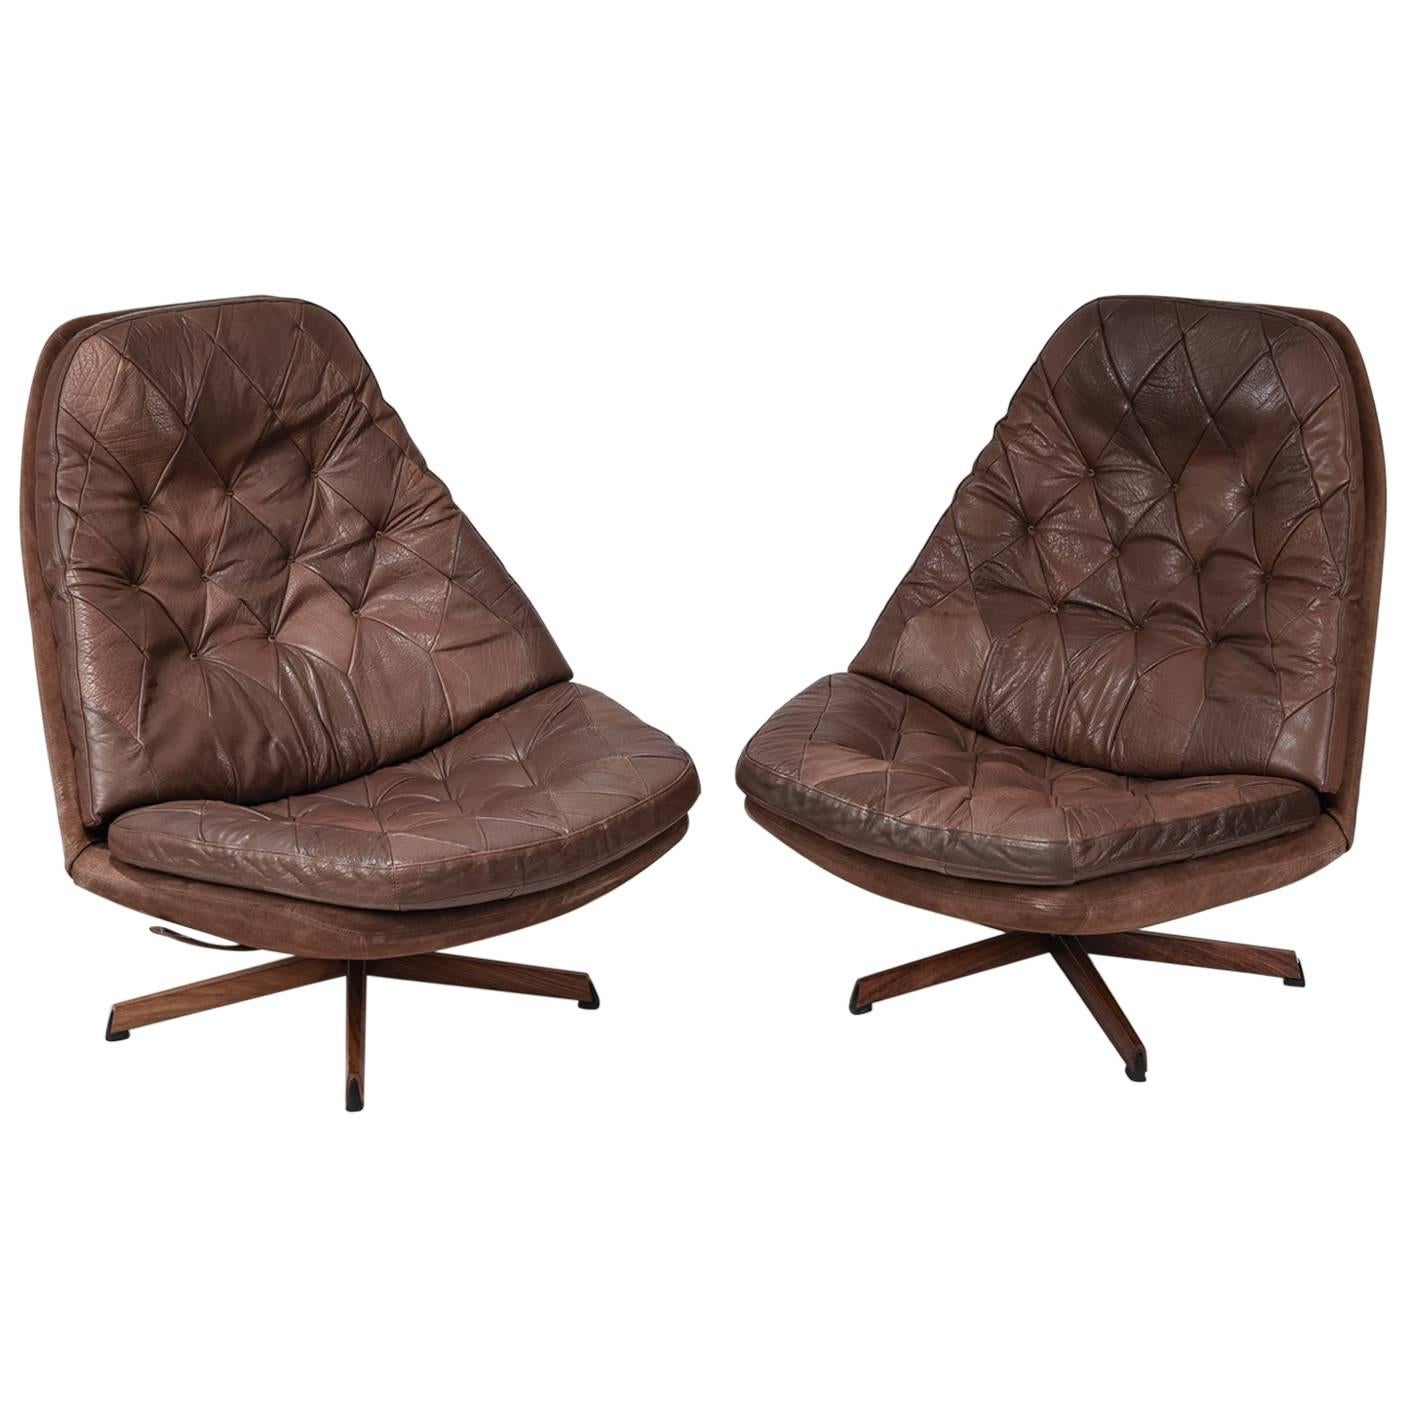 Pair of Madsen and Schubel Model Ms68 Leather Swivel High Back Lounge Chairs